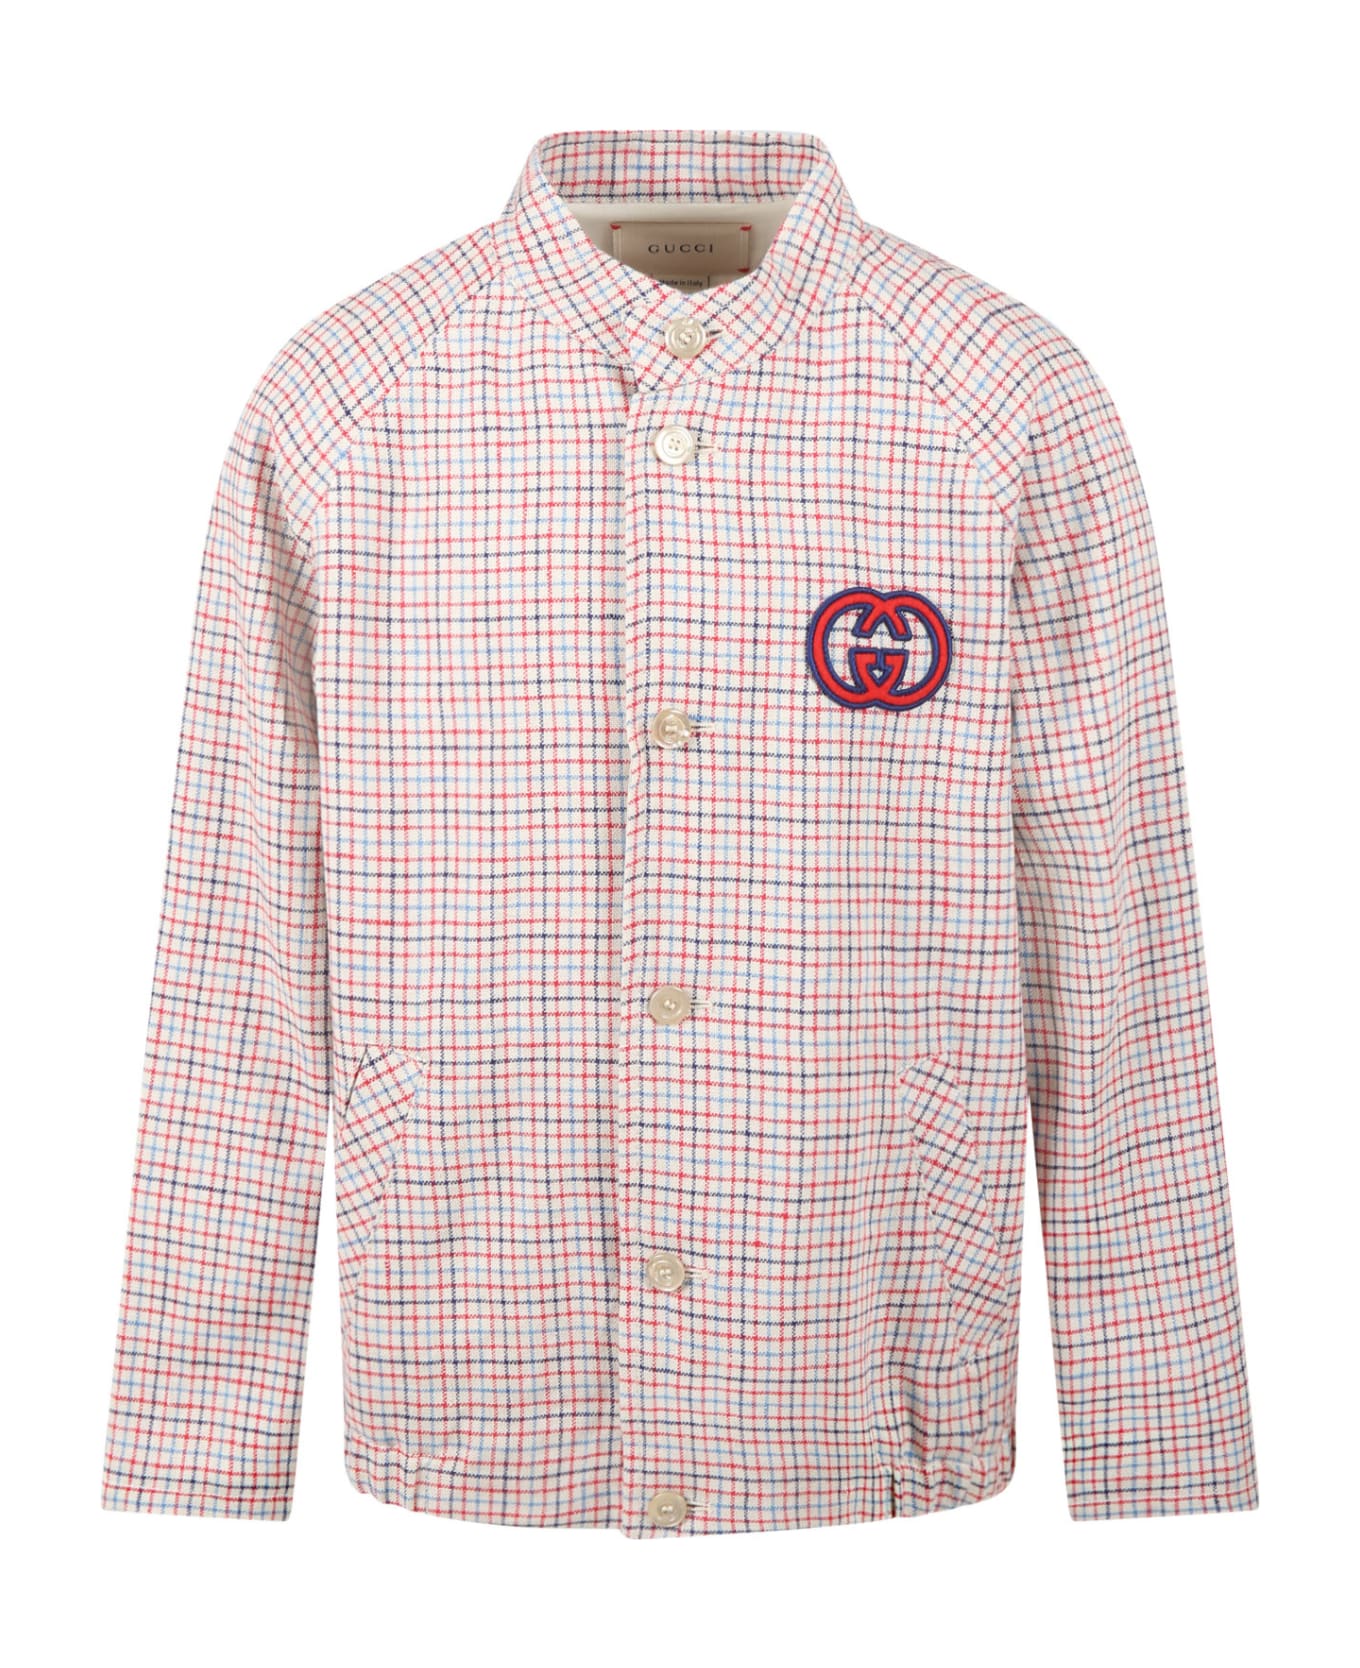 Gucci Beige Jacket For Kids With Double Gg - Cream Blue Red